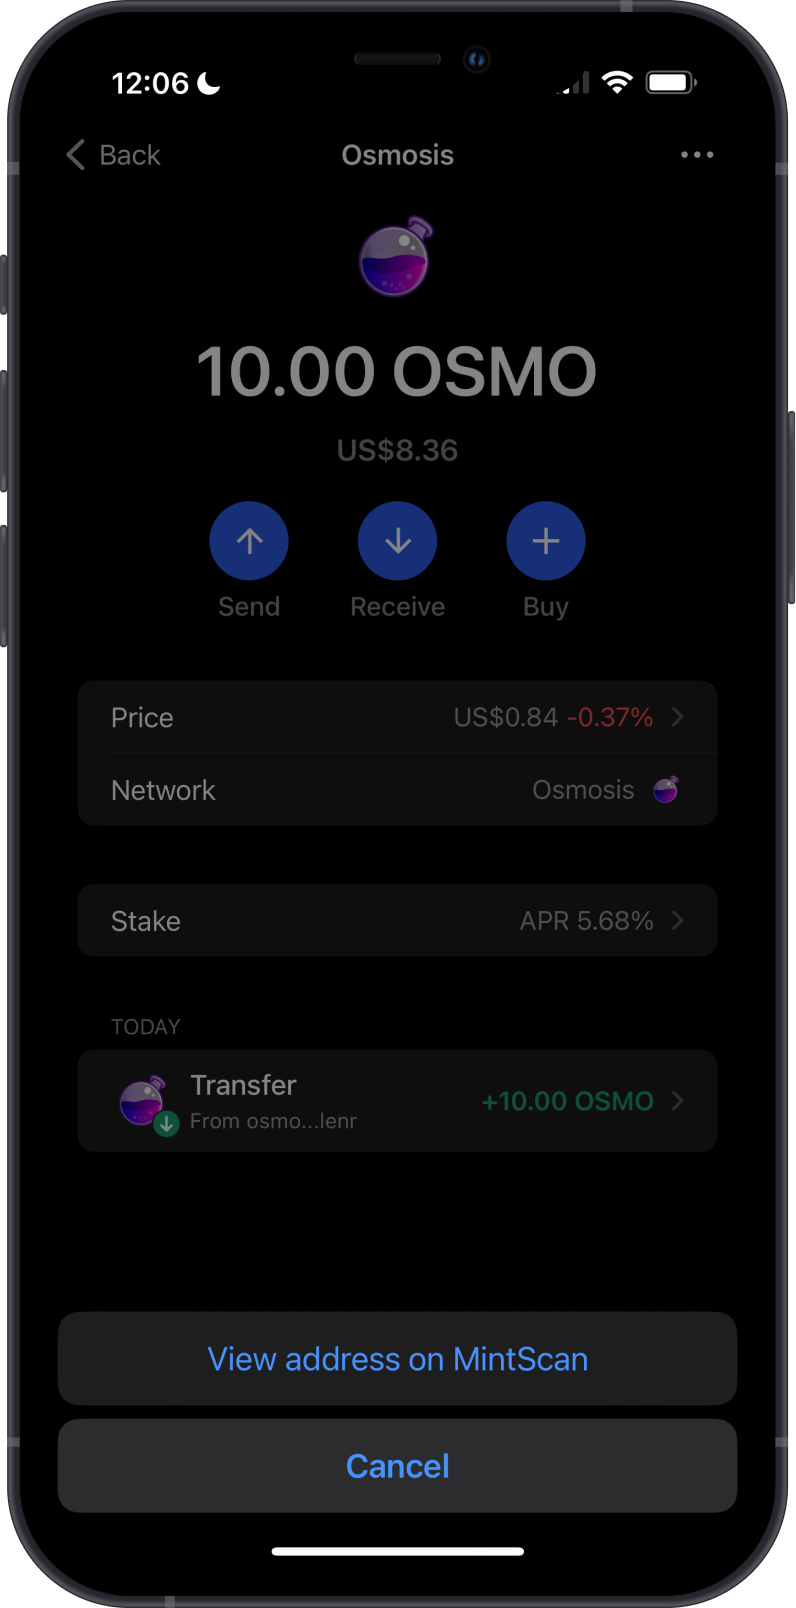 View OSMO Balance on Gem Wallet